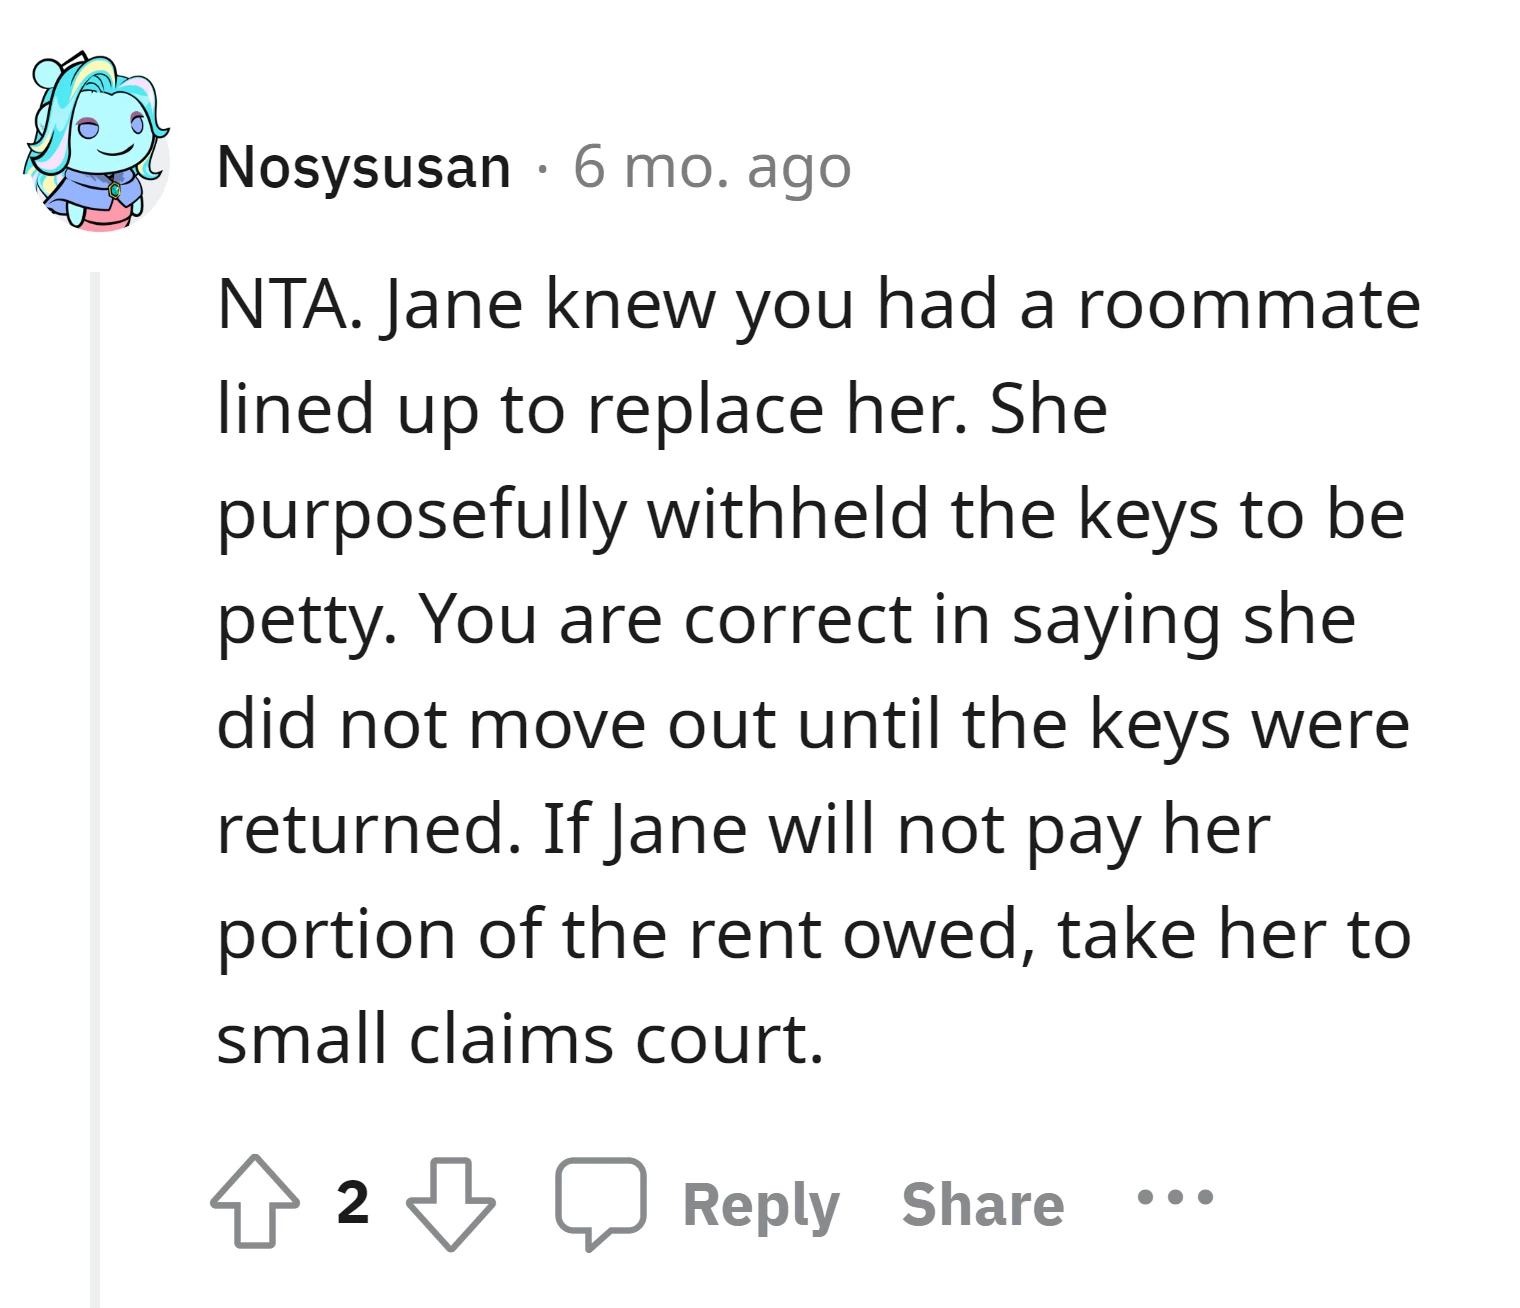 "If Jane will not pay her portion of the rent owed, take her to small claims court"